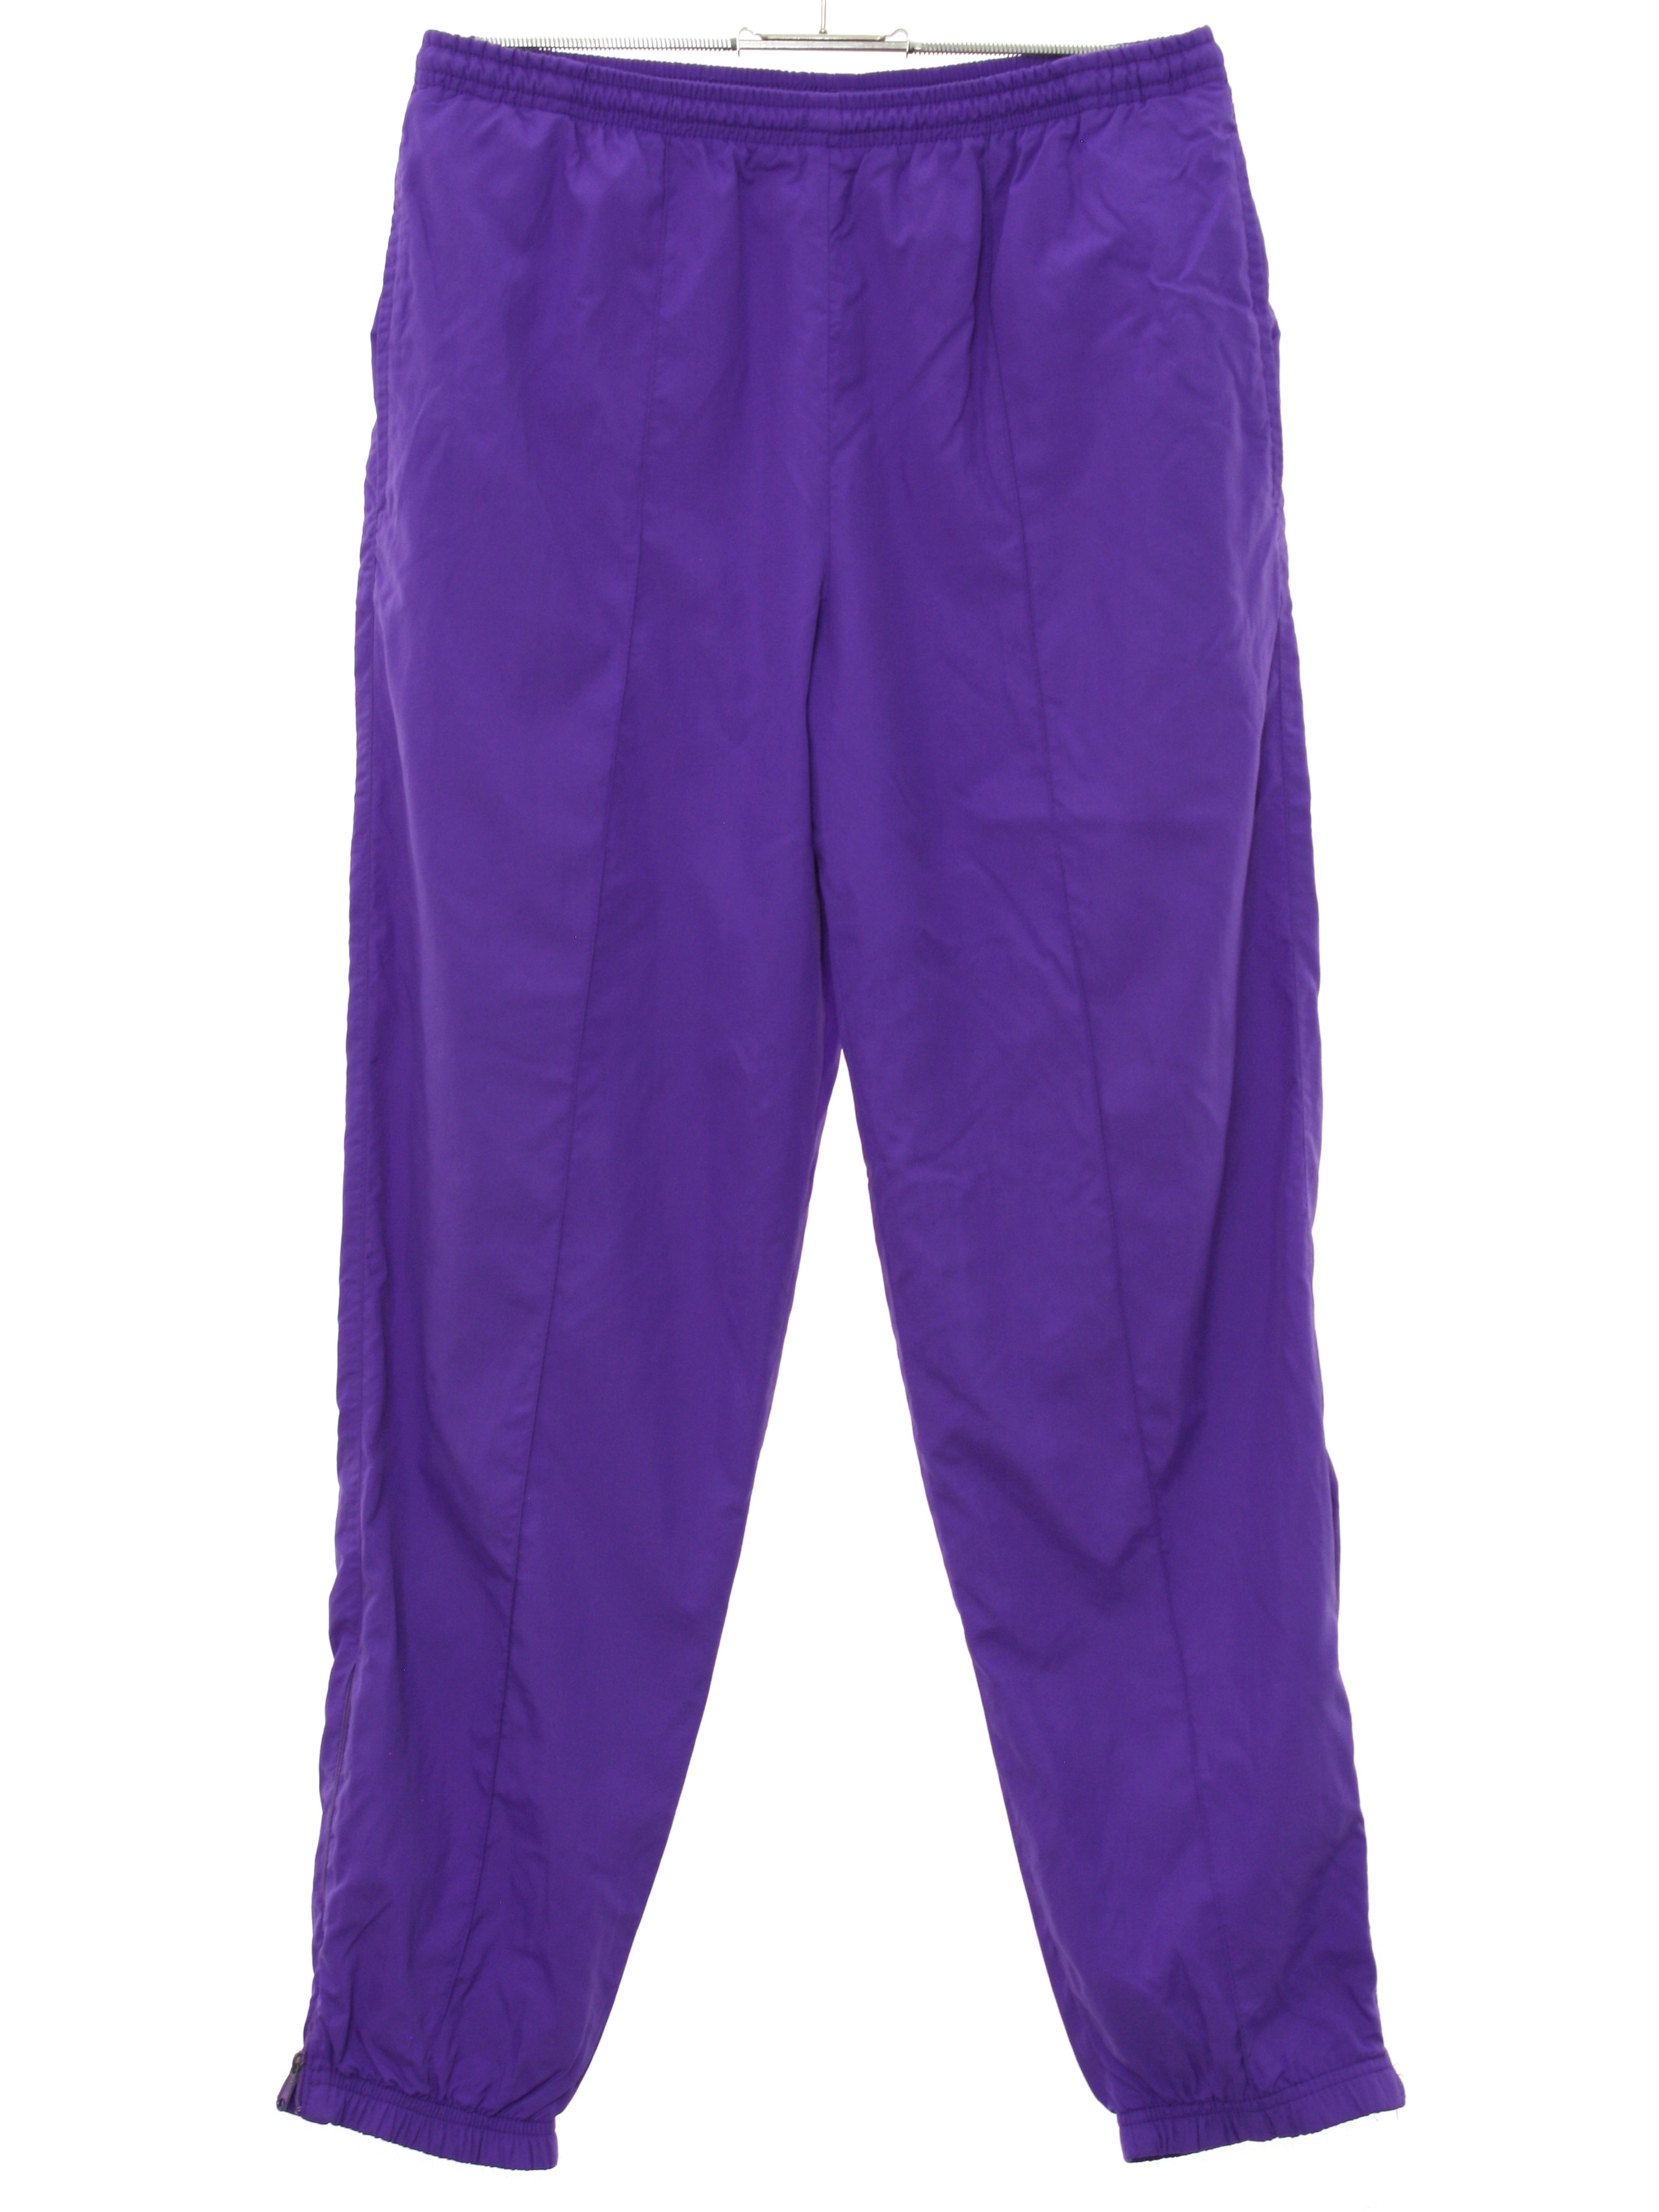 1980s Head Sportswear Pants: 80s -Head Sportswear- Womens purple solid  colored nylon shell , tapered leg baggy totally 80s track pants with  elastic cuff hem with ankle zipper, vertical seam inset side